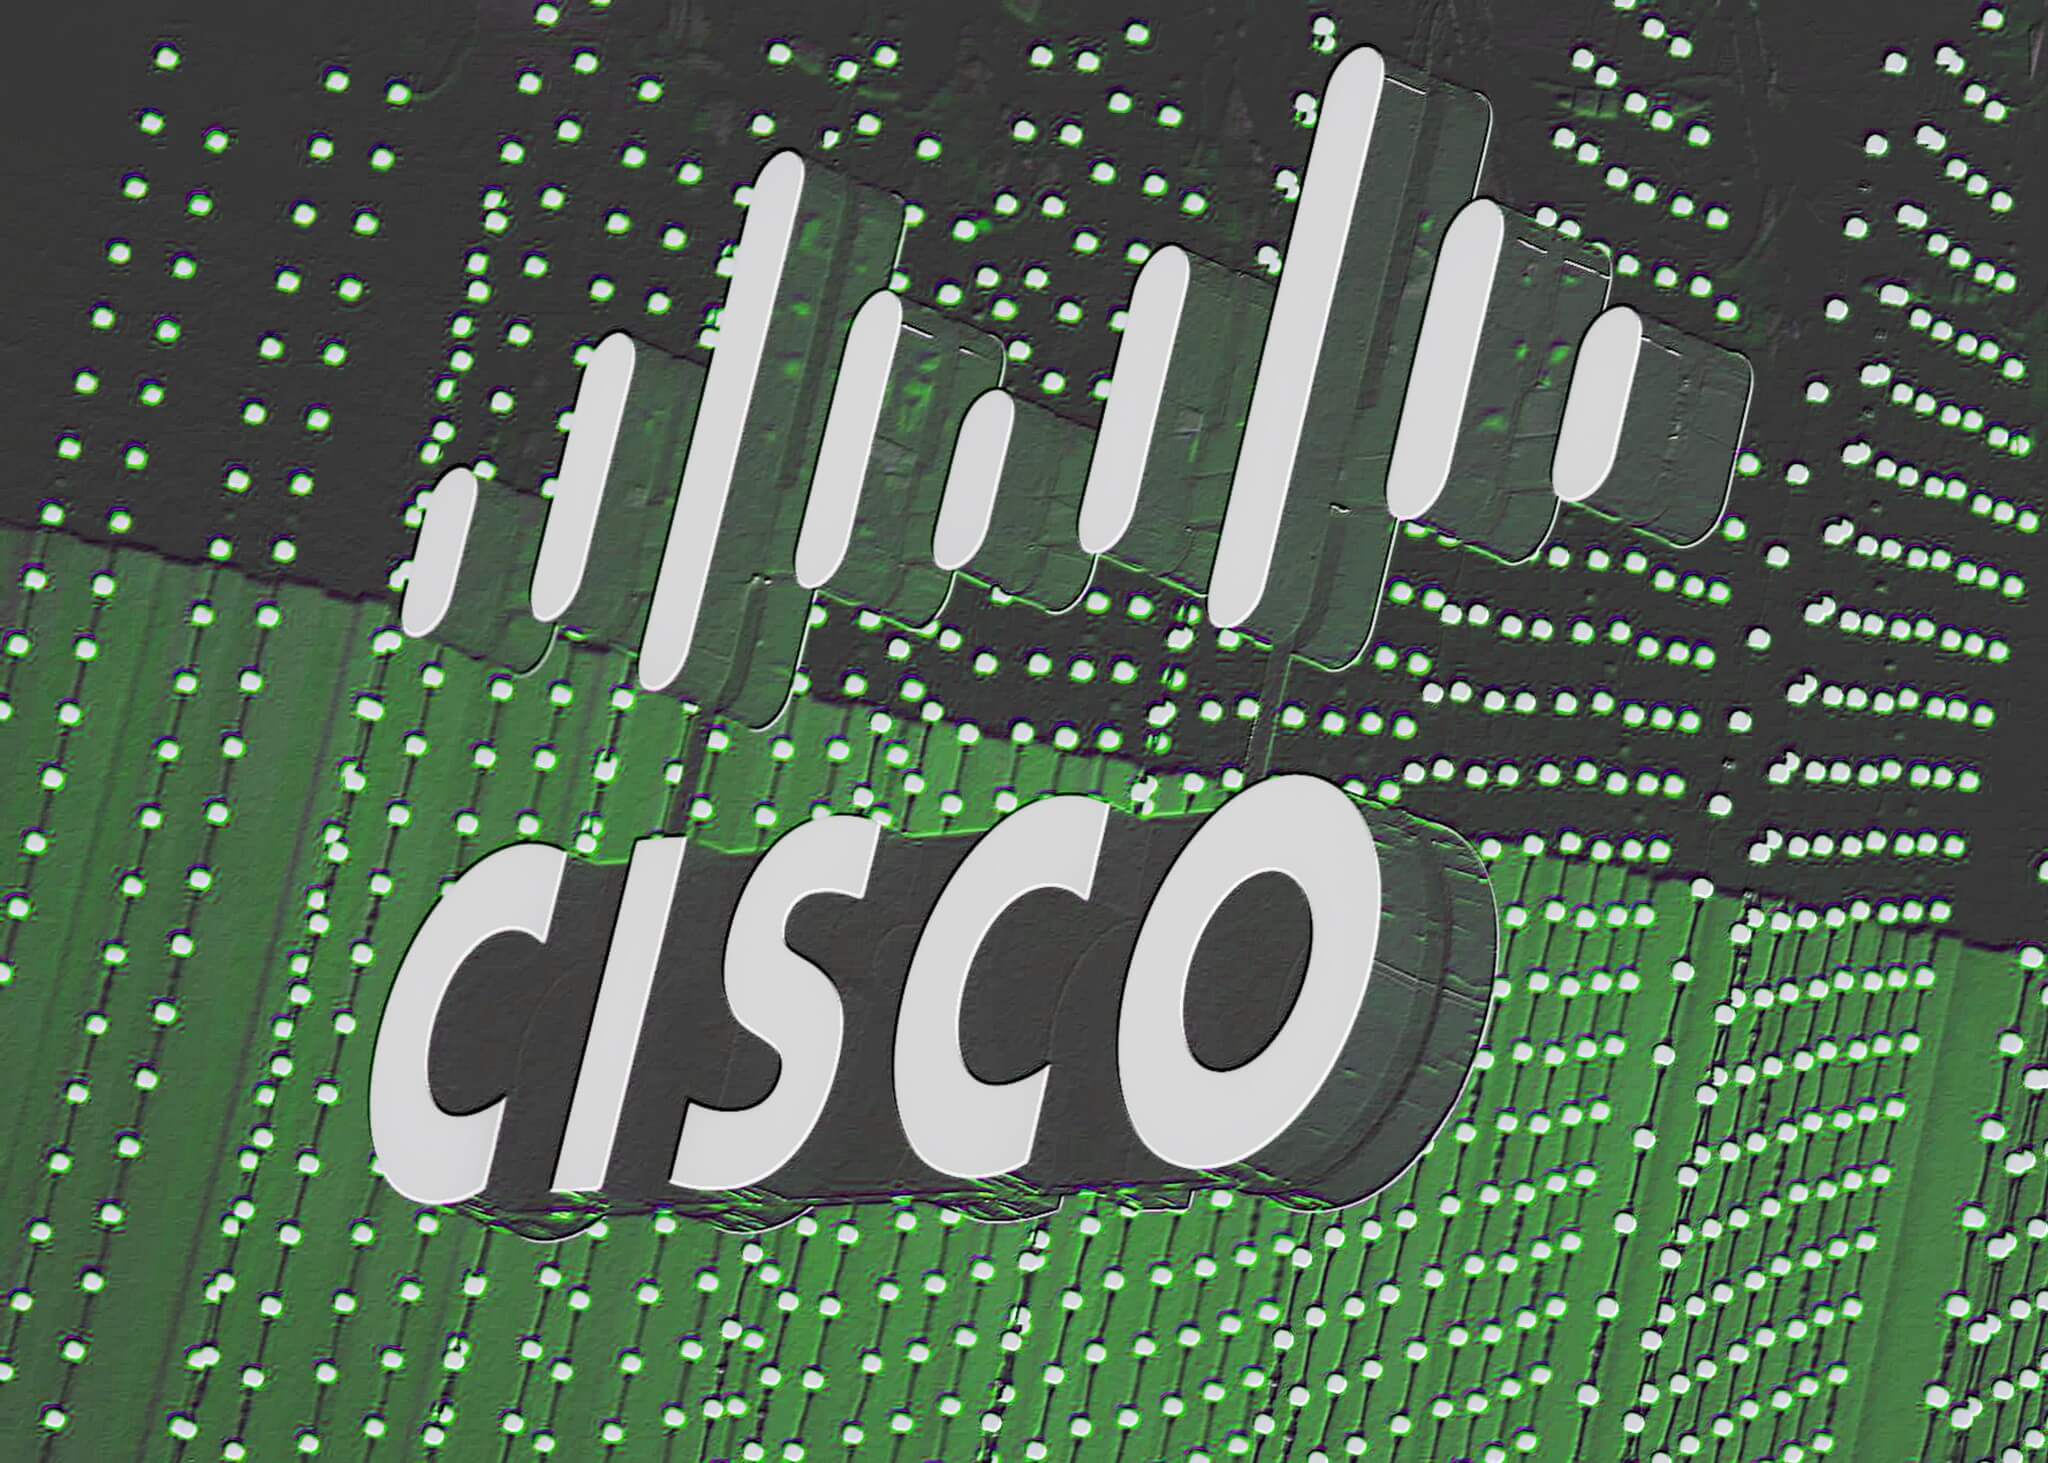 Cisco NYSE:CSCO Analyzing Earnings and Stock Performance